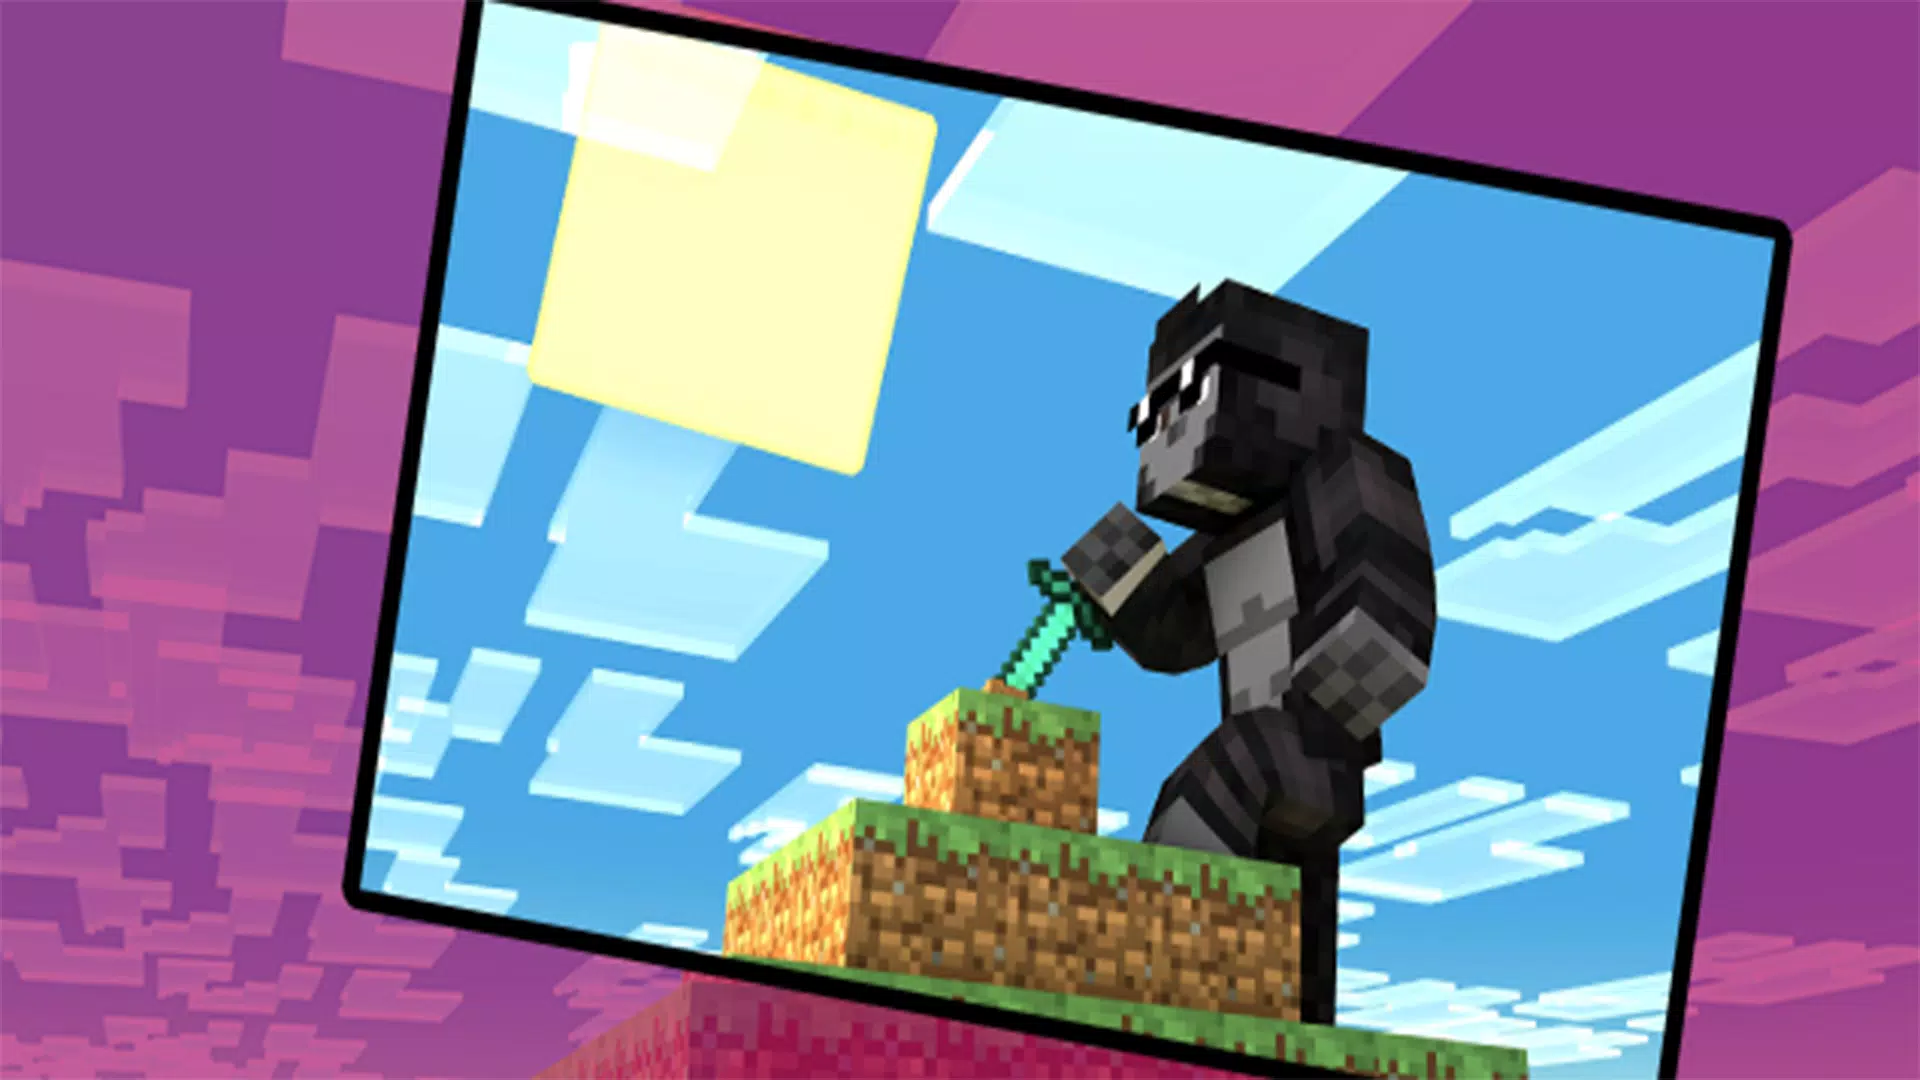 Gorilla Tag Skin for MCPE::Appstore for Android